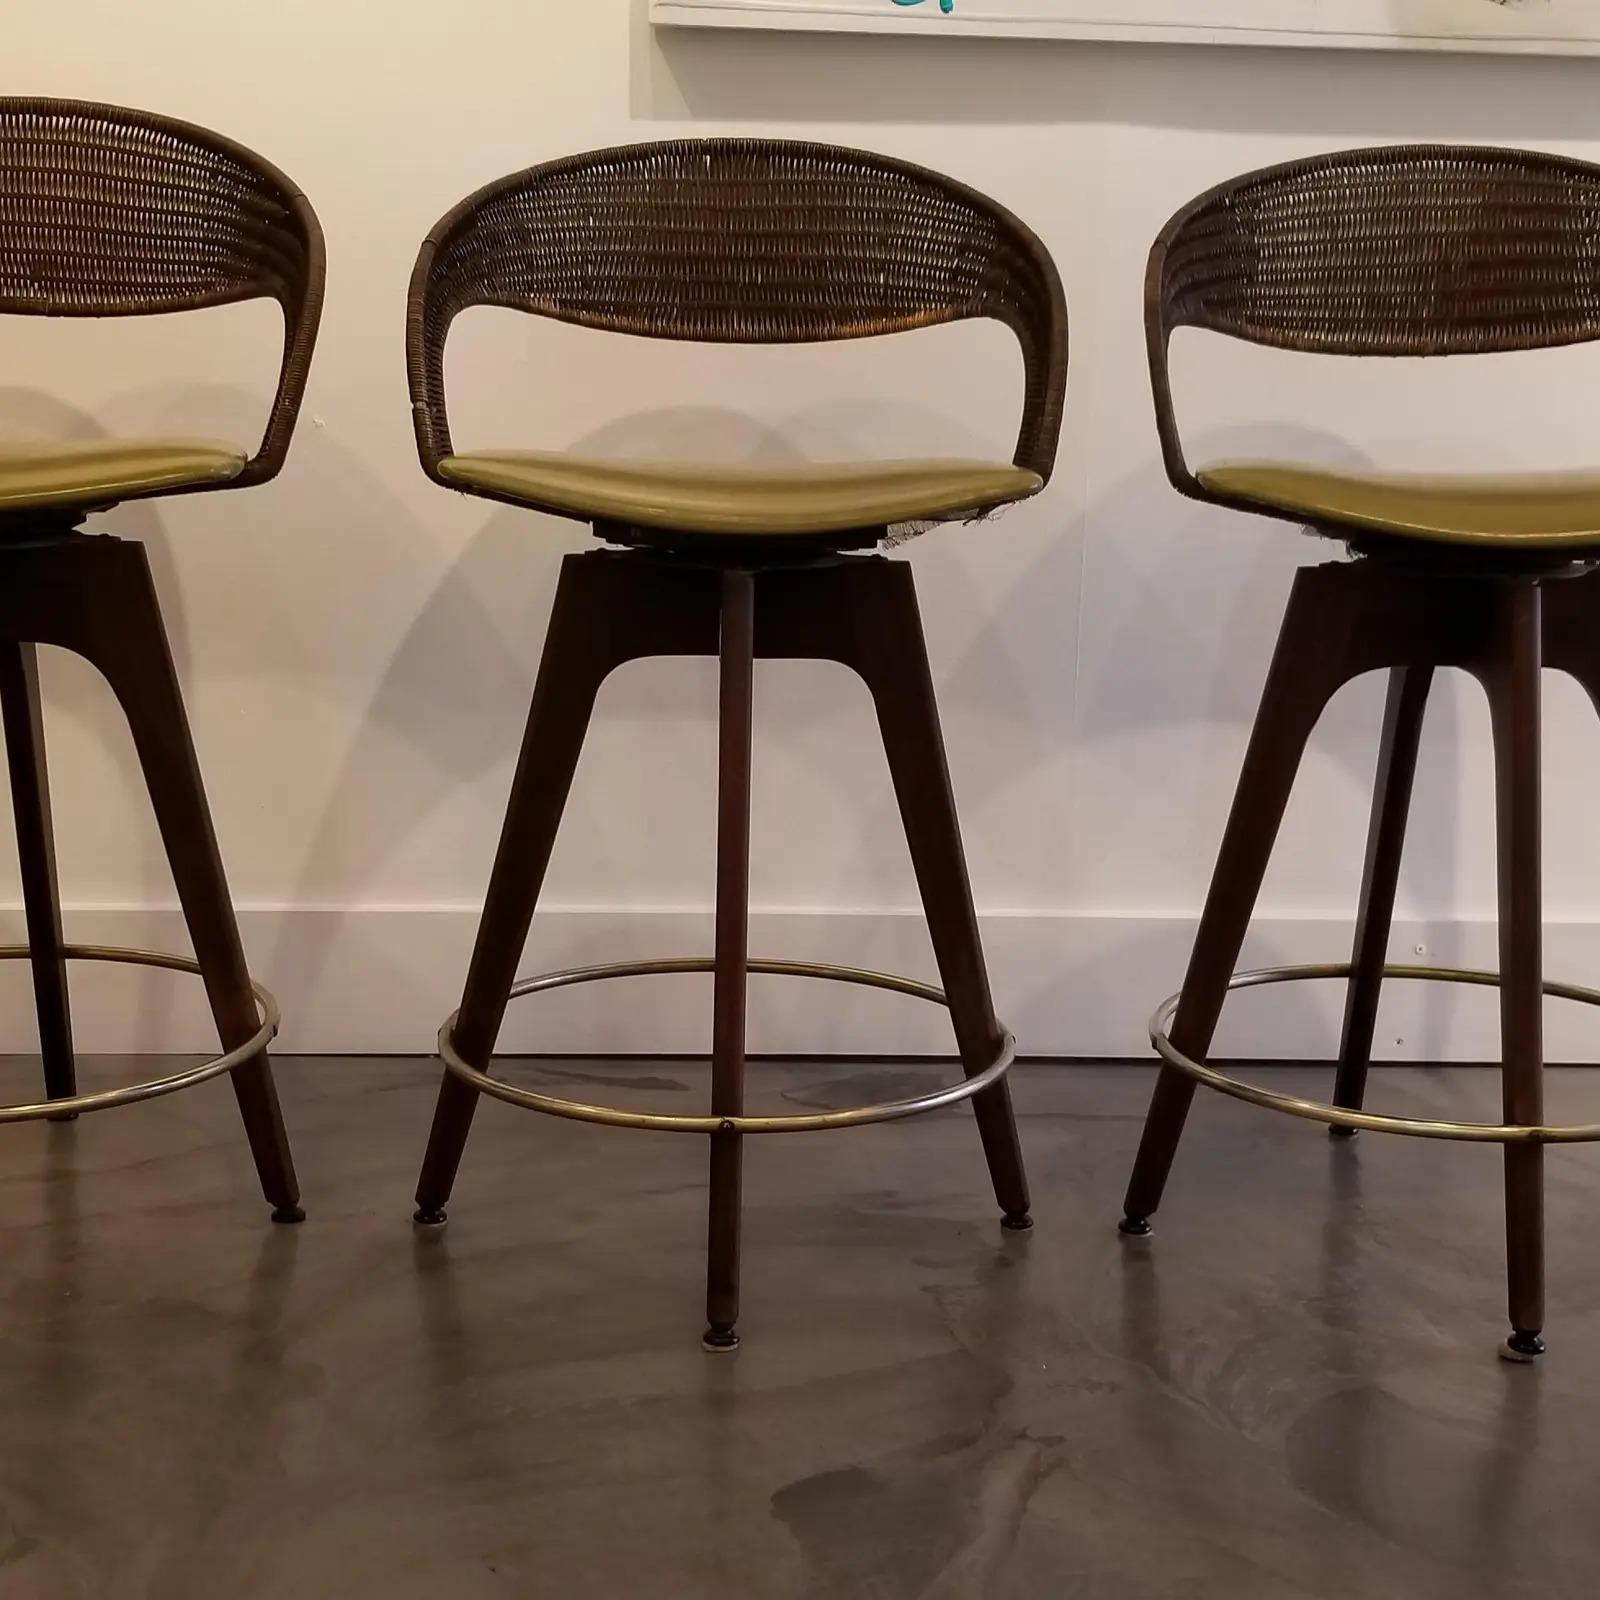 Set of 3 Steel, iron, walnut, rattan and vinyl Mid-Century Modern bar stools designed by Chet Beardsley, circa 1960s. In very good original, vintage condition with light, age appropriate wear. Seating and back rests structurally solid. Original